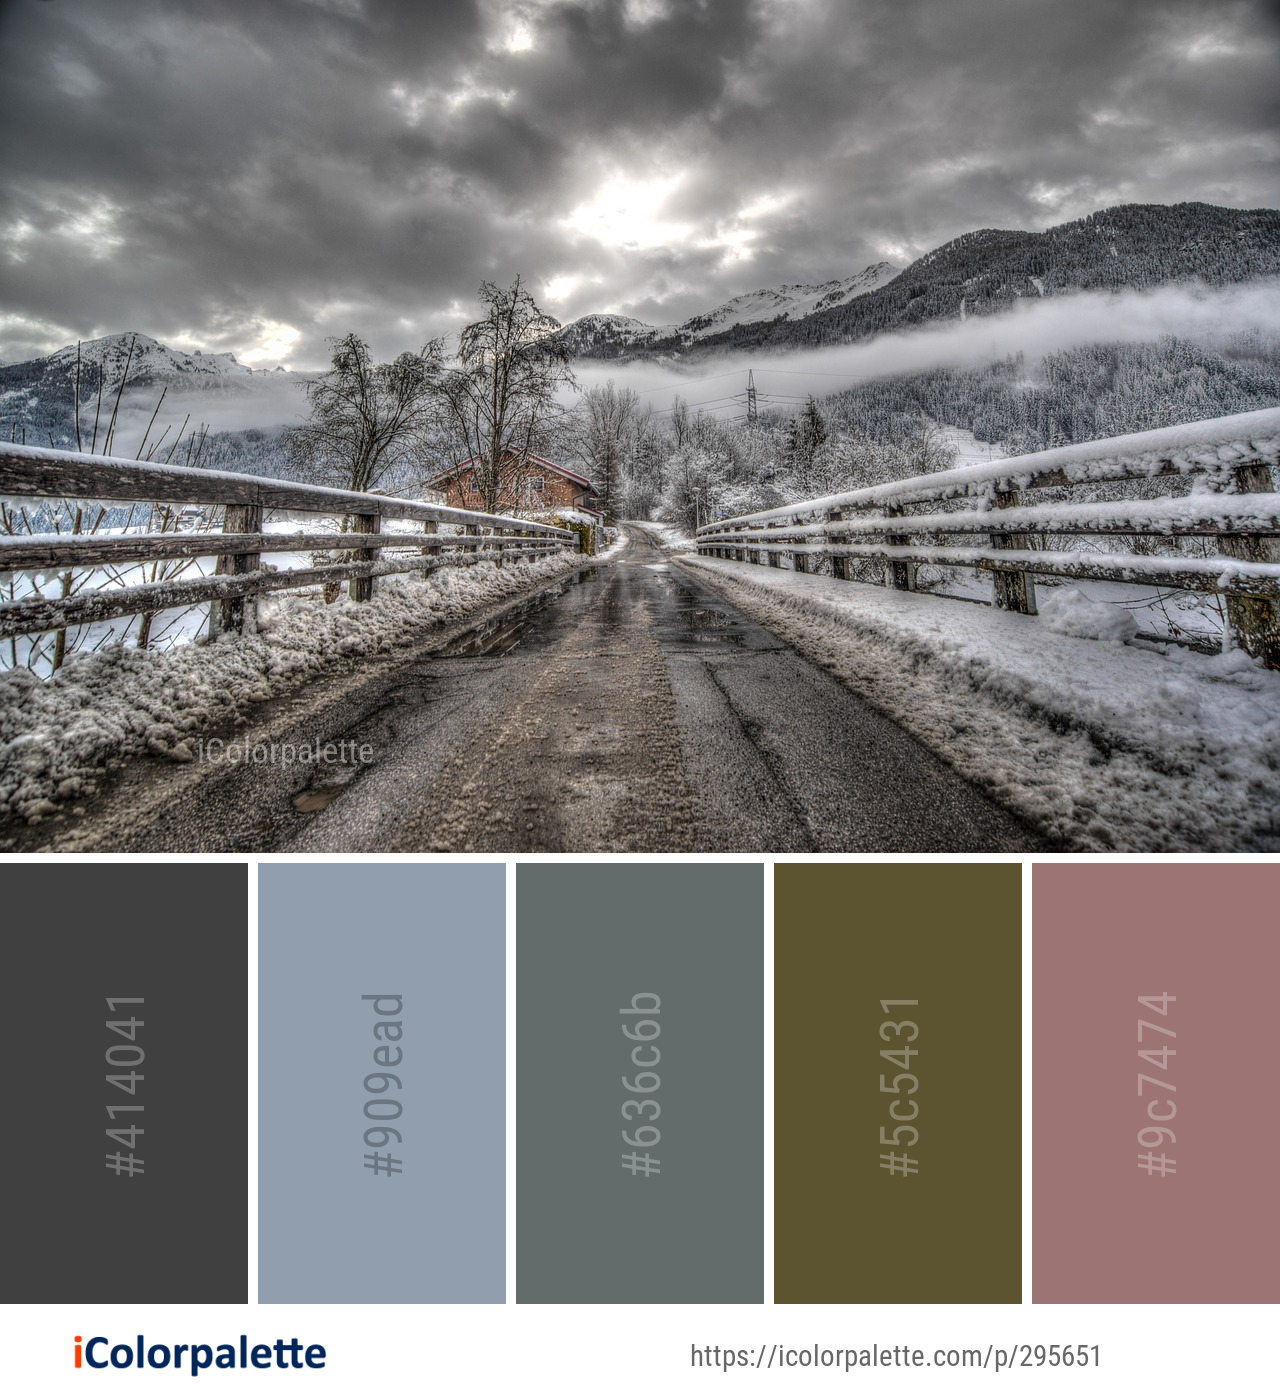 Download Color Palette Ideas From Road Snow Cloud Image Icolorpalette